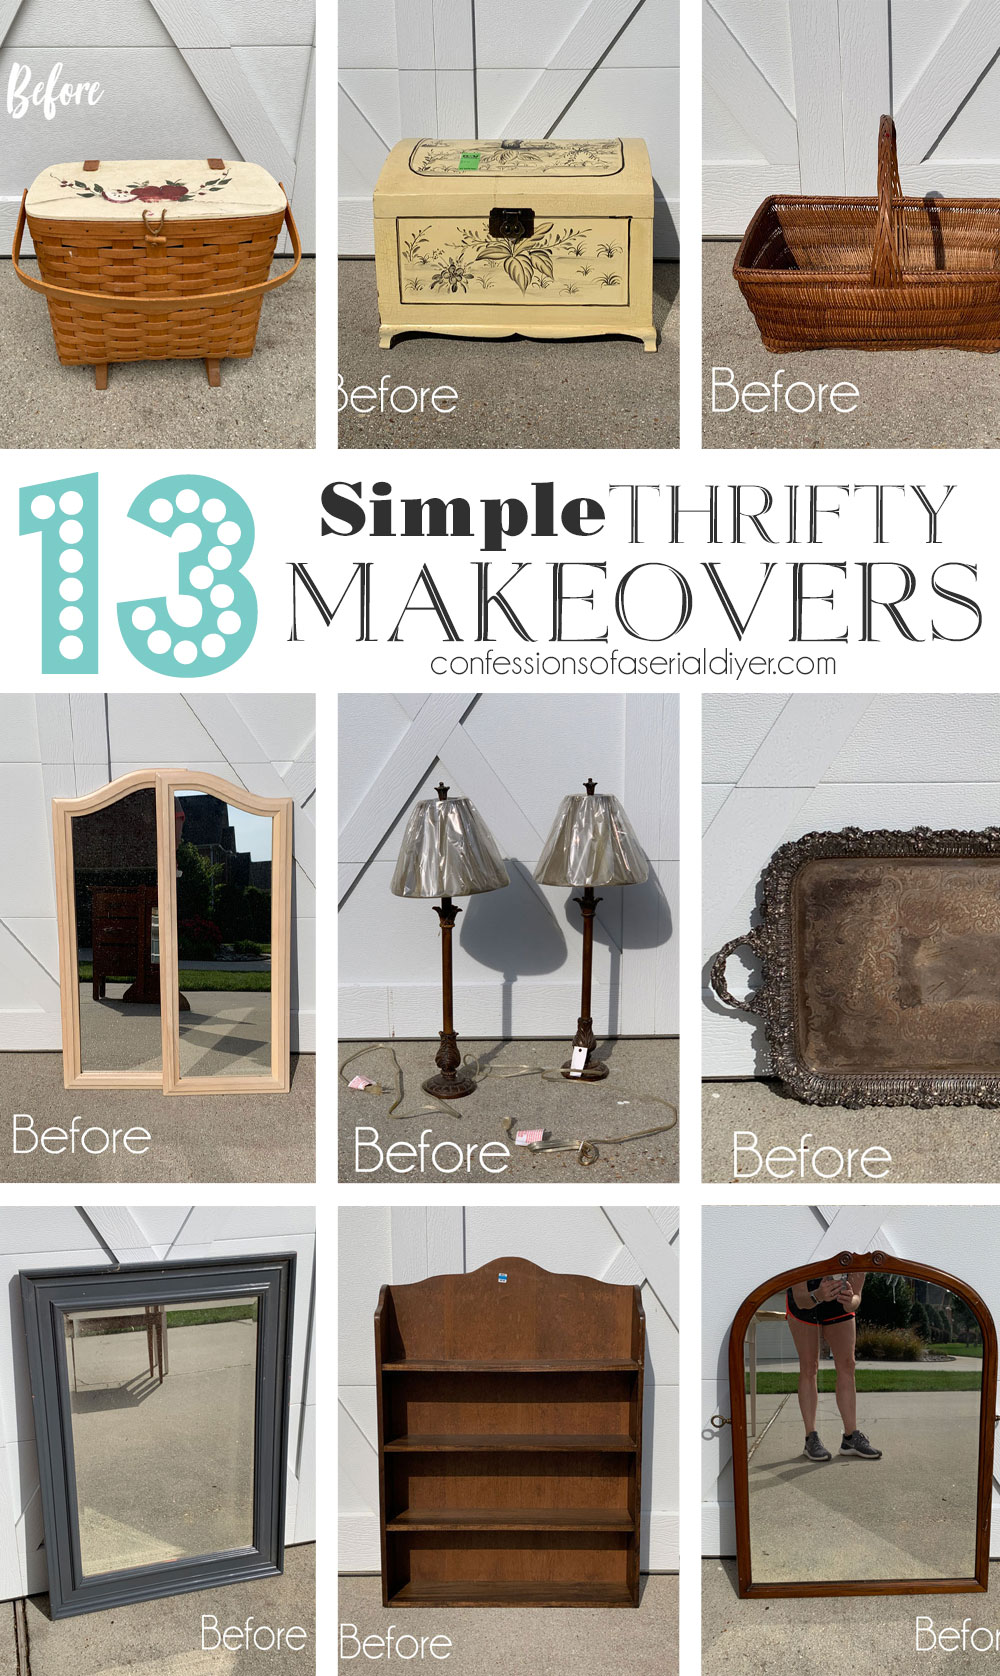 13 Simple Thrifty Makeovers